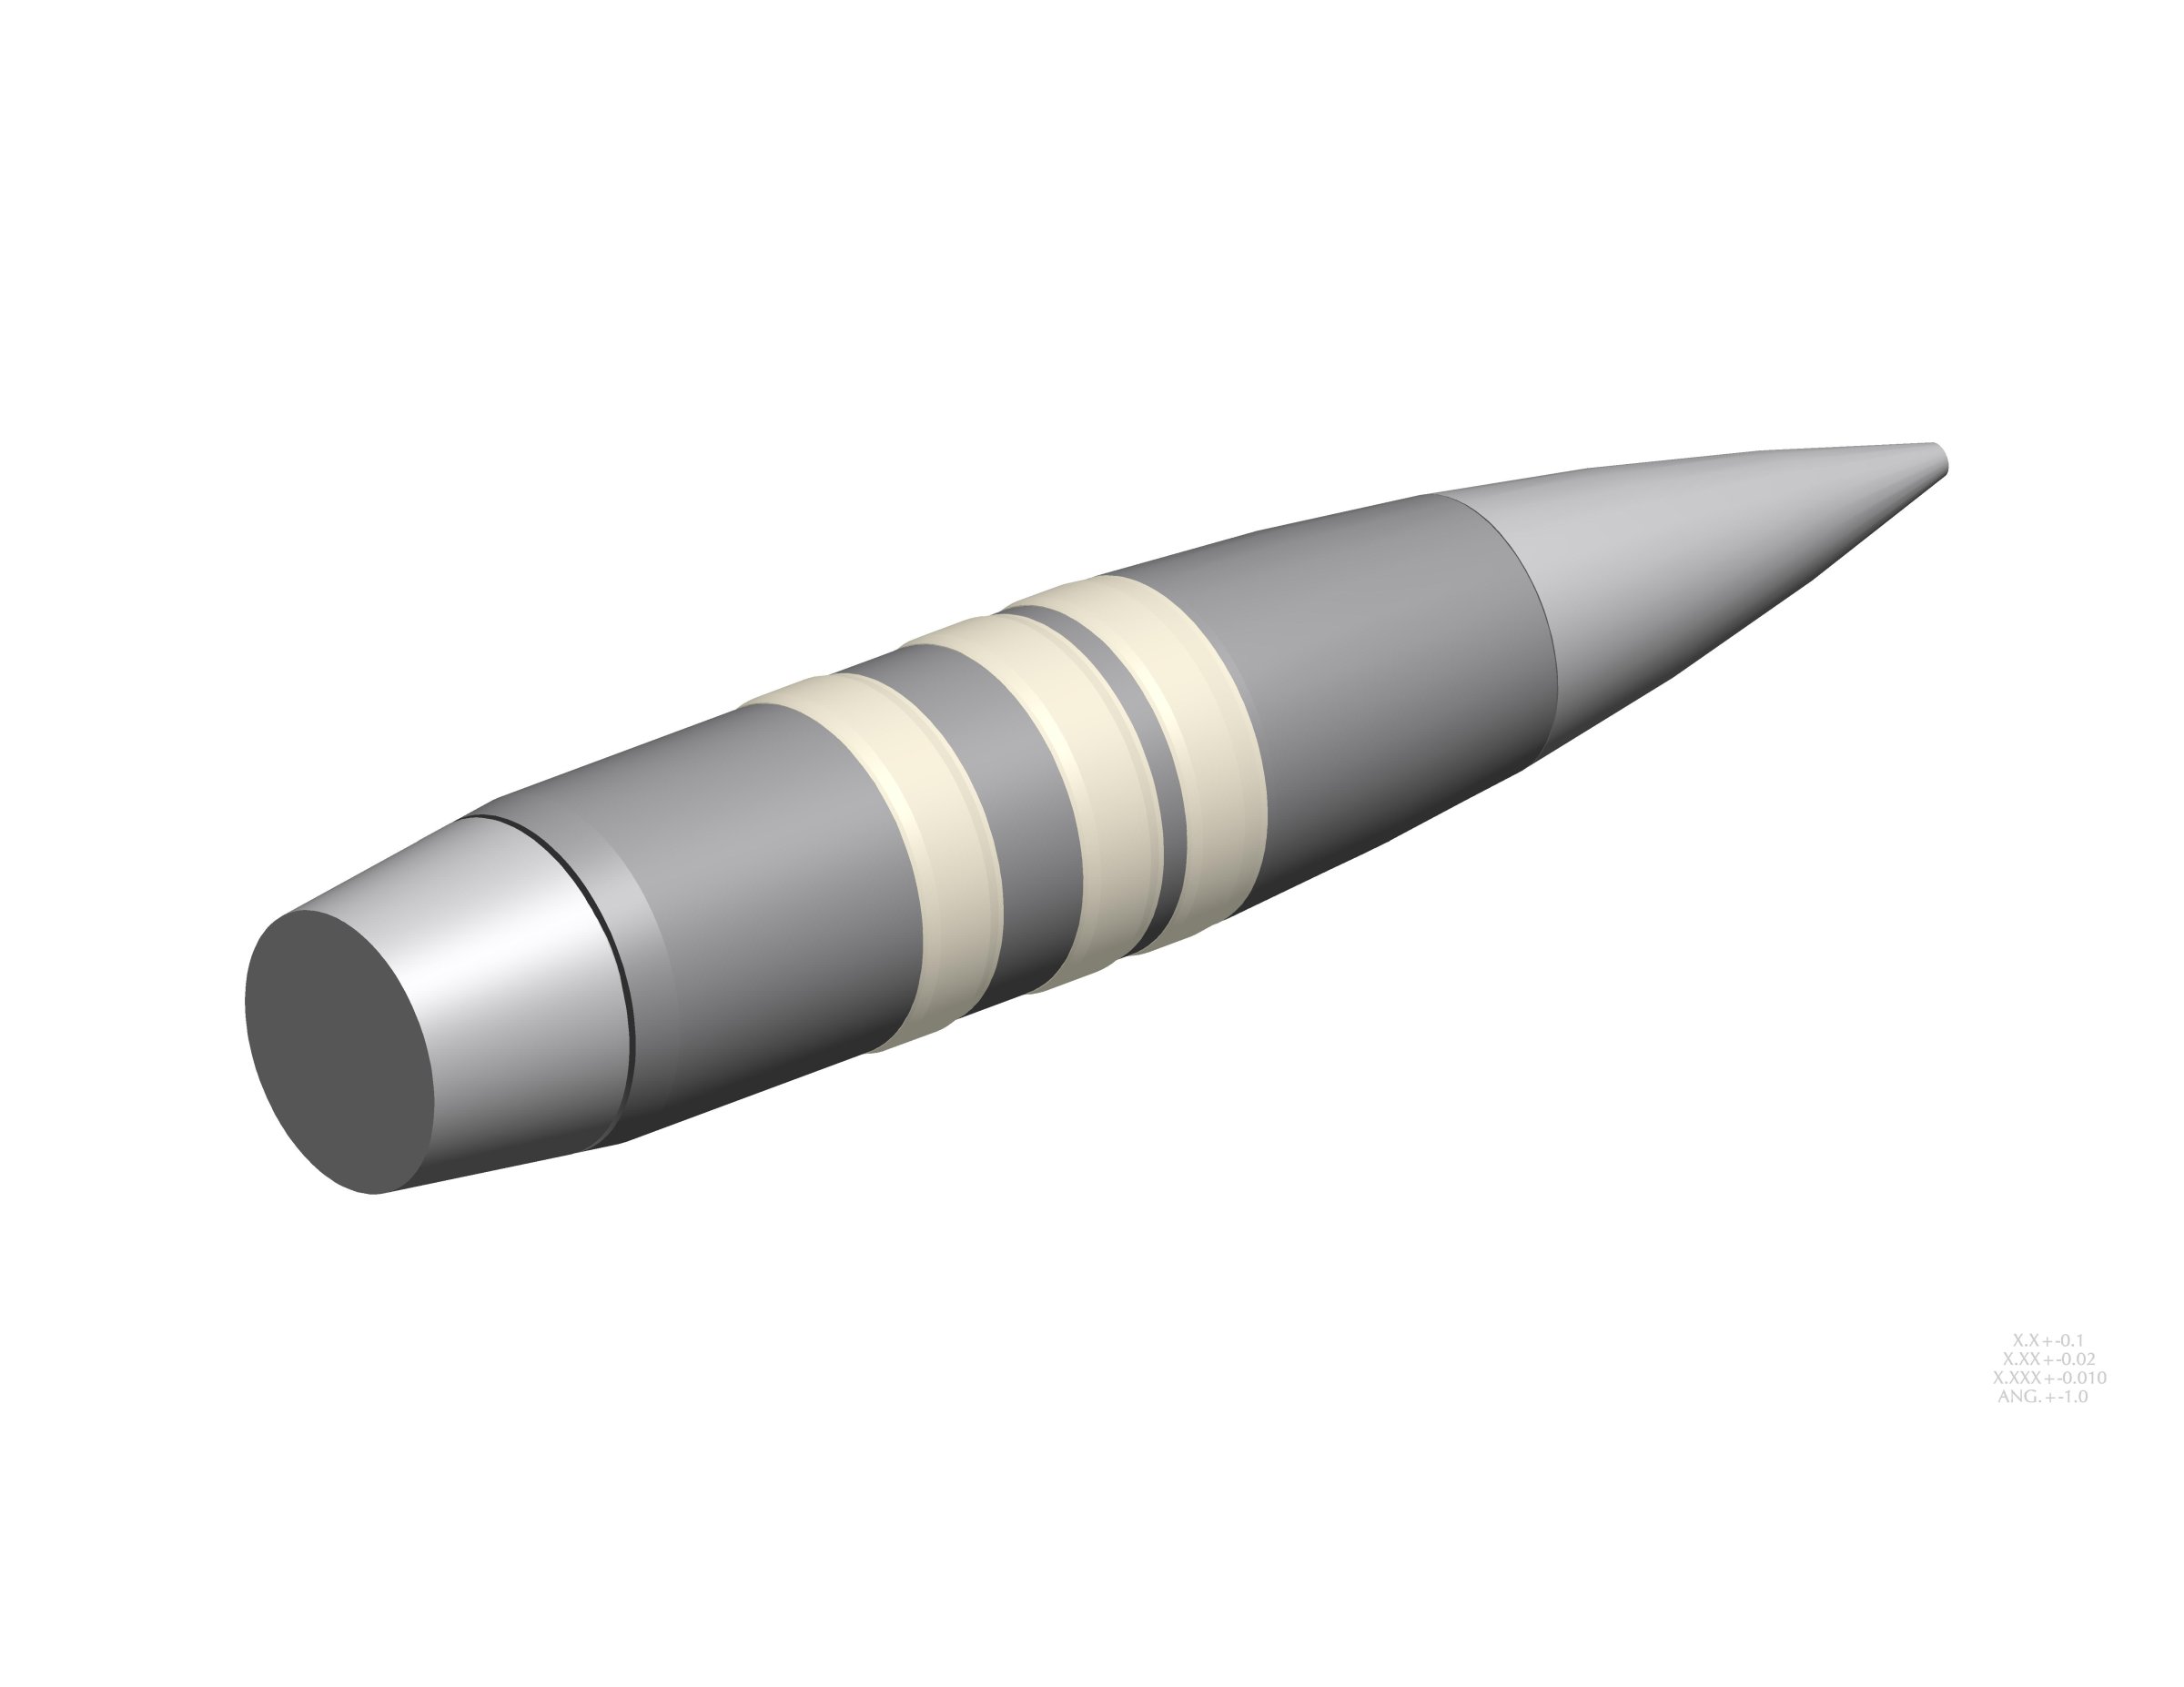 DARPA's Extreme Accuracy Tasked Ordnance (EXACTO) bullet may be precise, but its artist's rendering of the round is pretty vague.